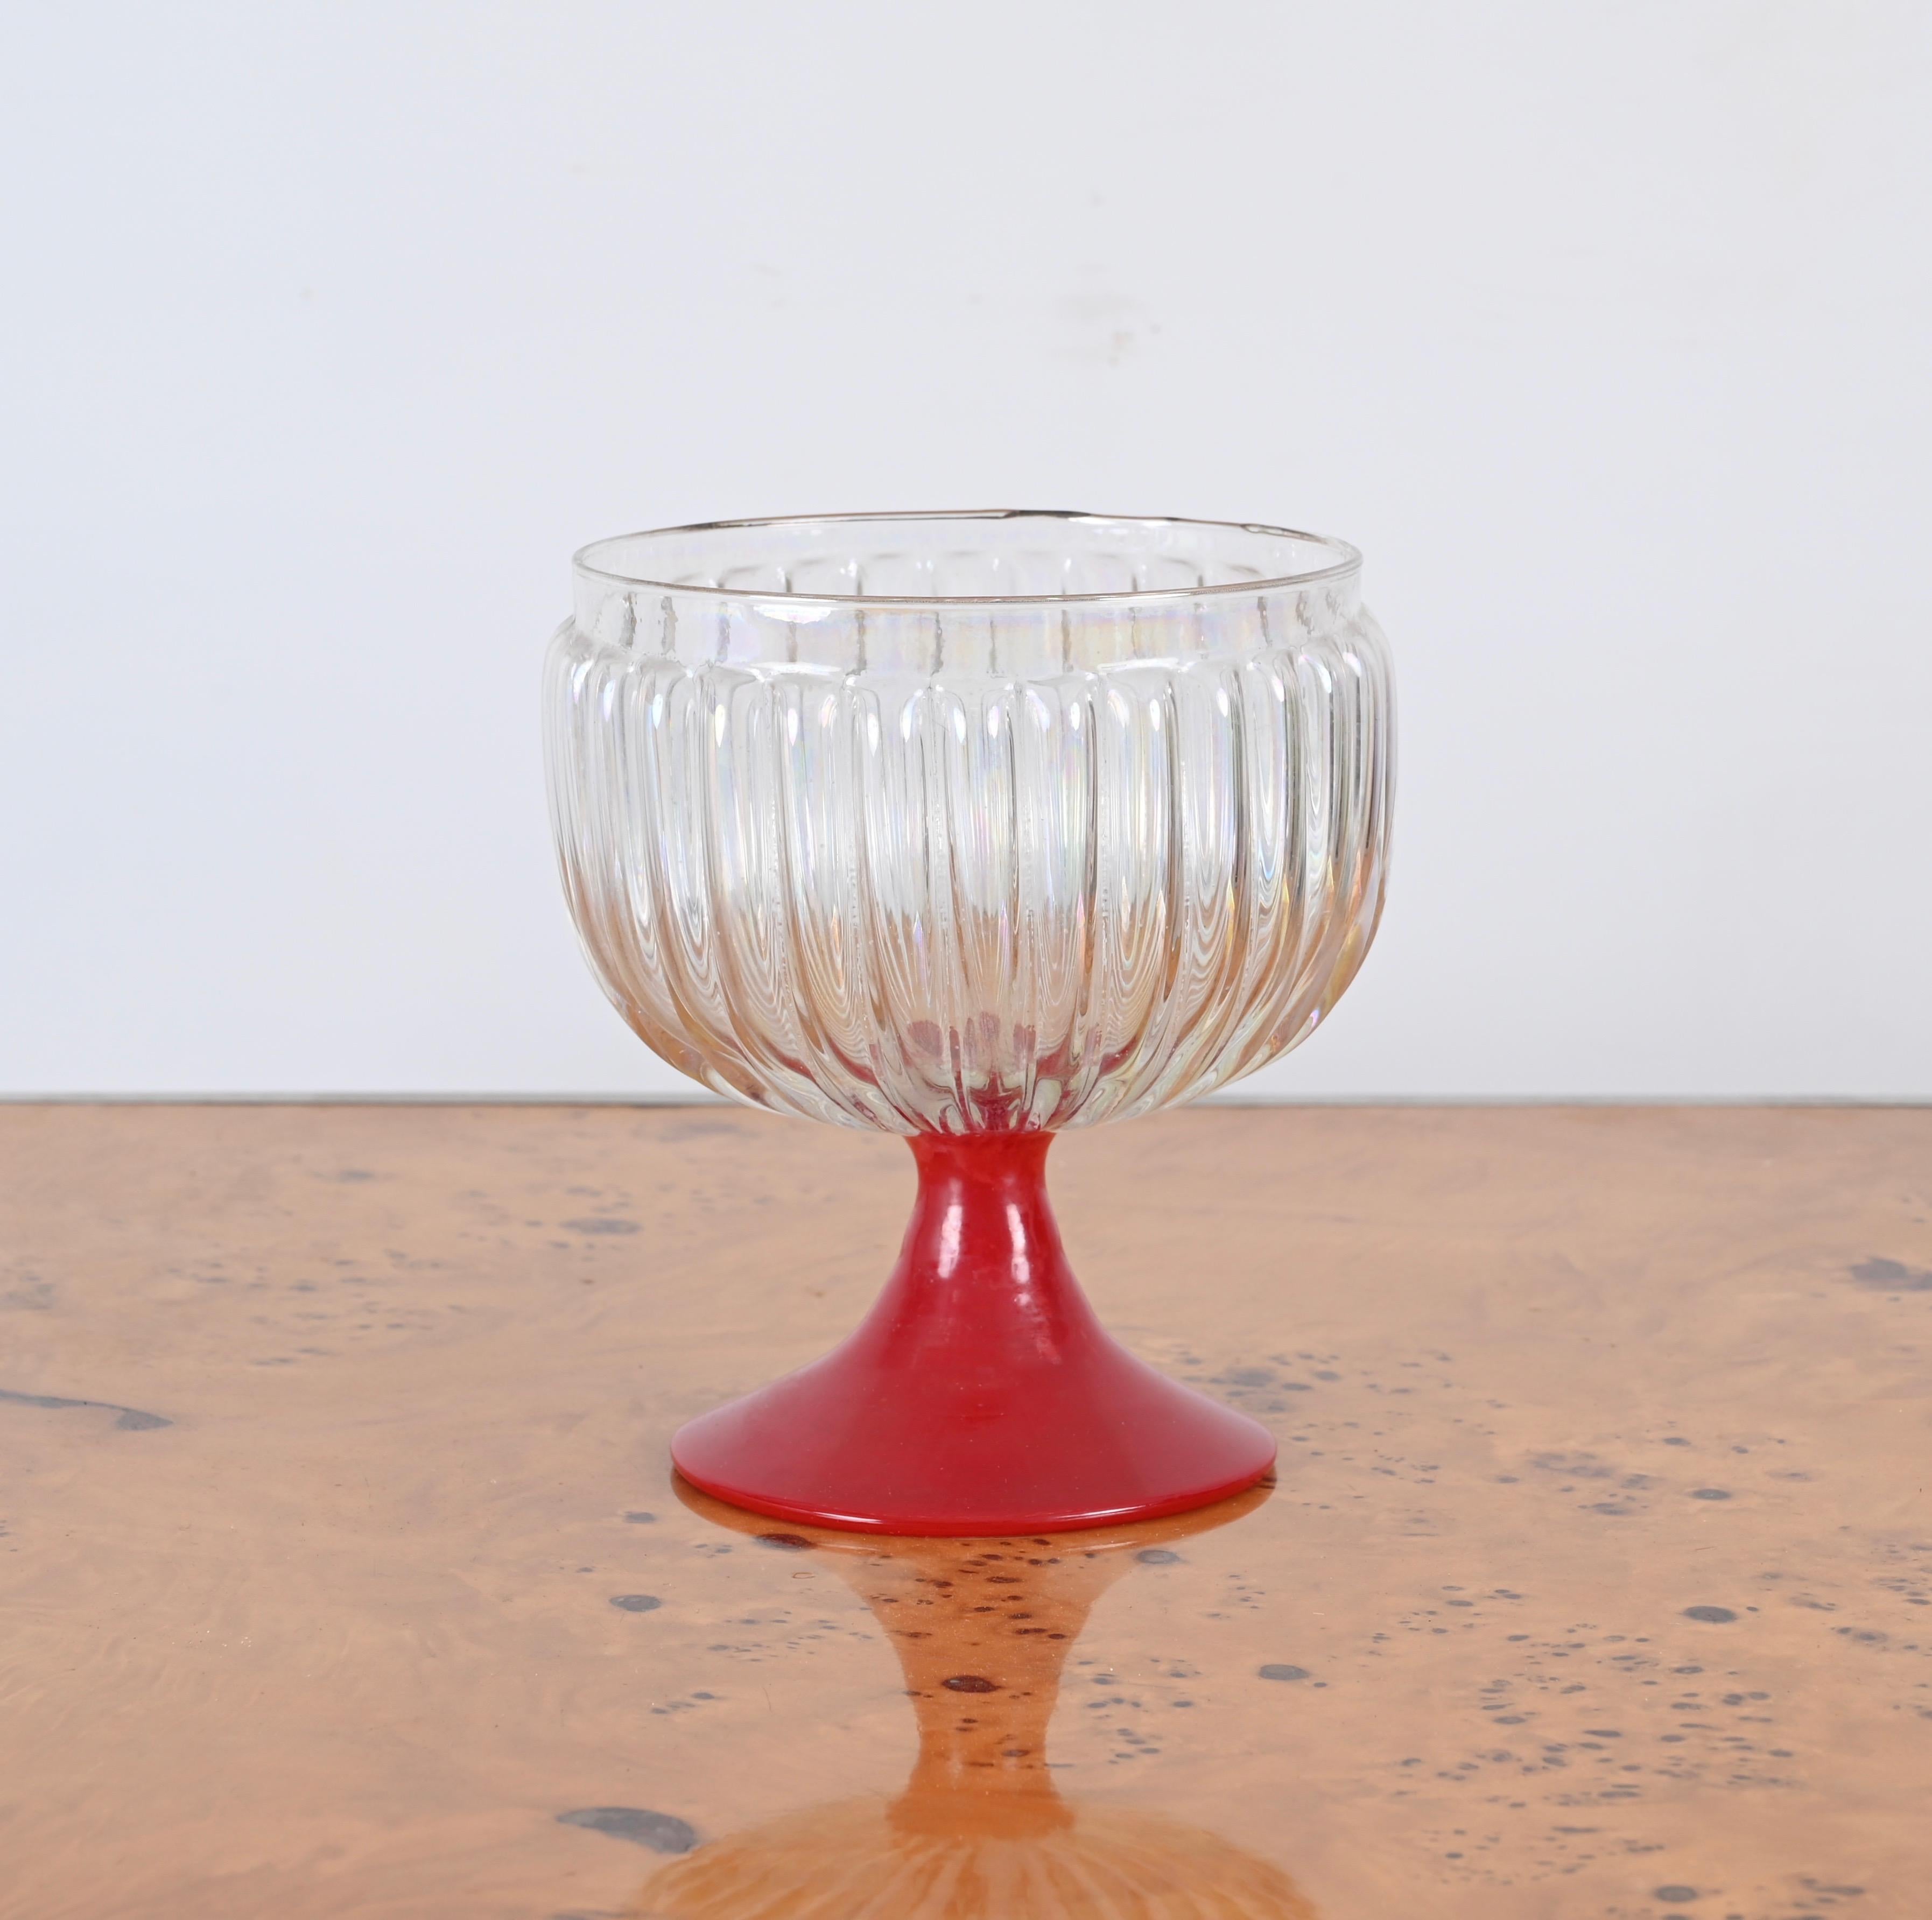 Pair of Large Decorative Murano Red and Iridescent Goblet Glasses, Italy 1940s For Sale 1